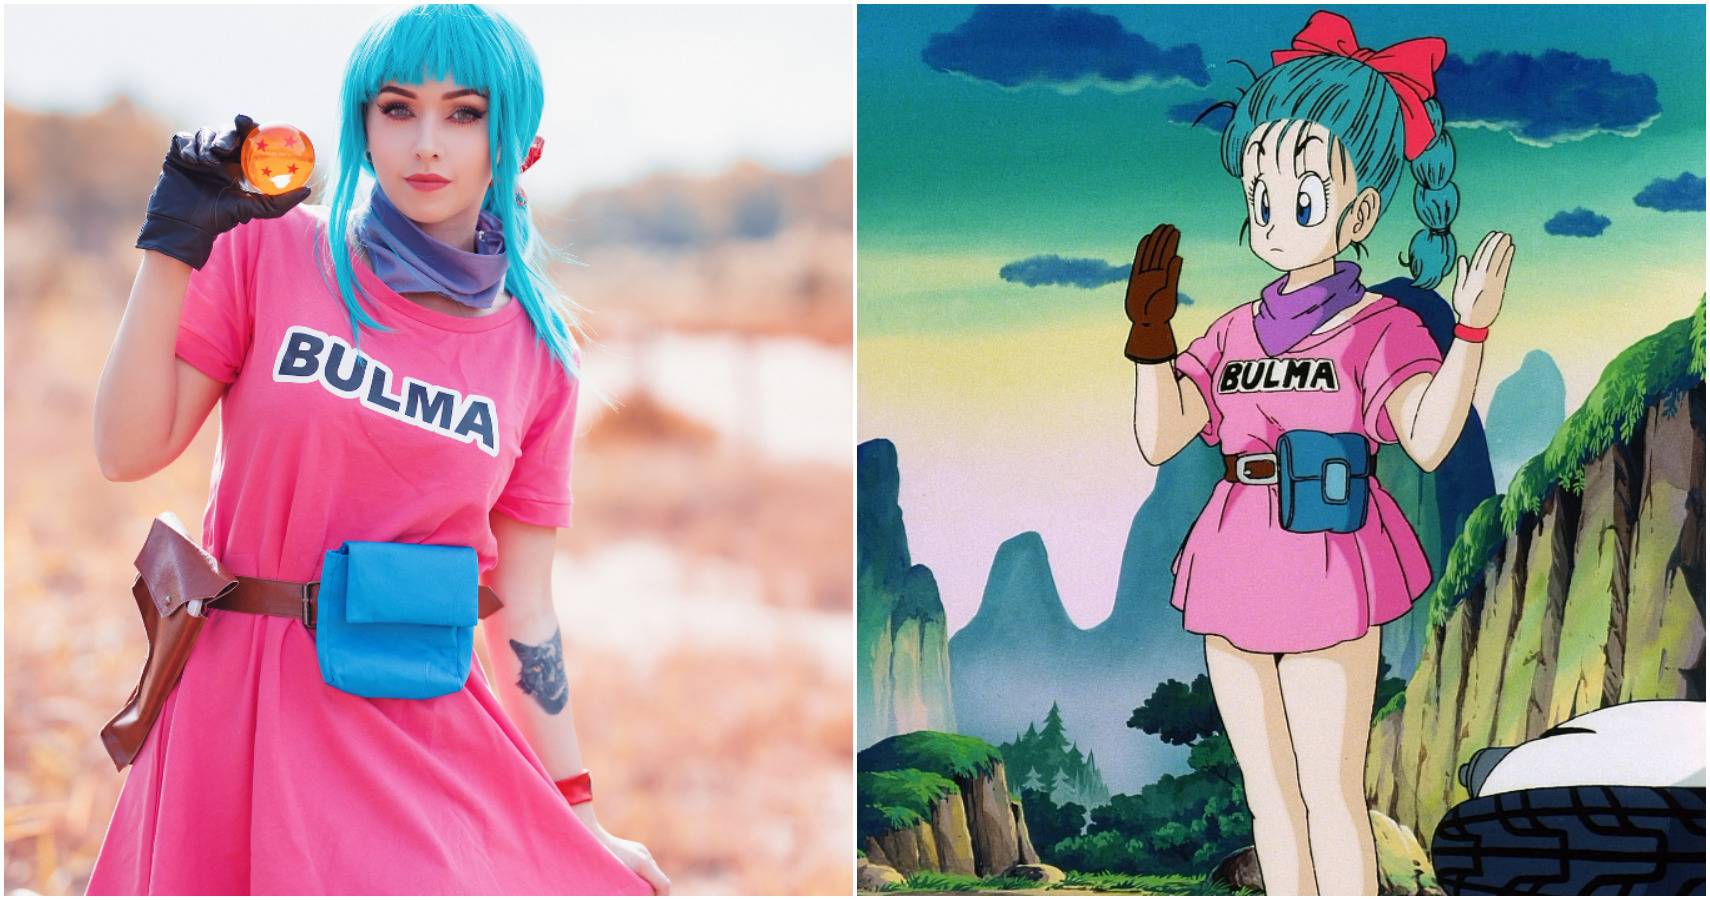 Bulma pink outfit